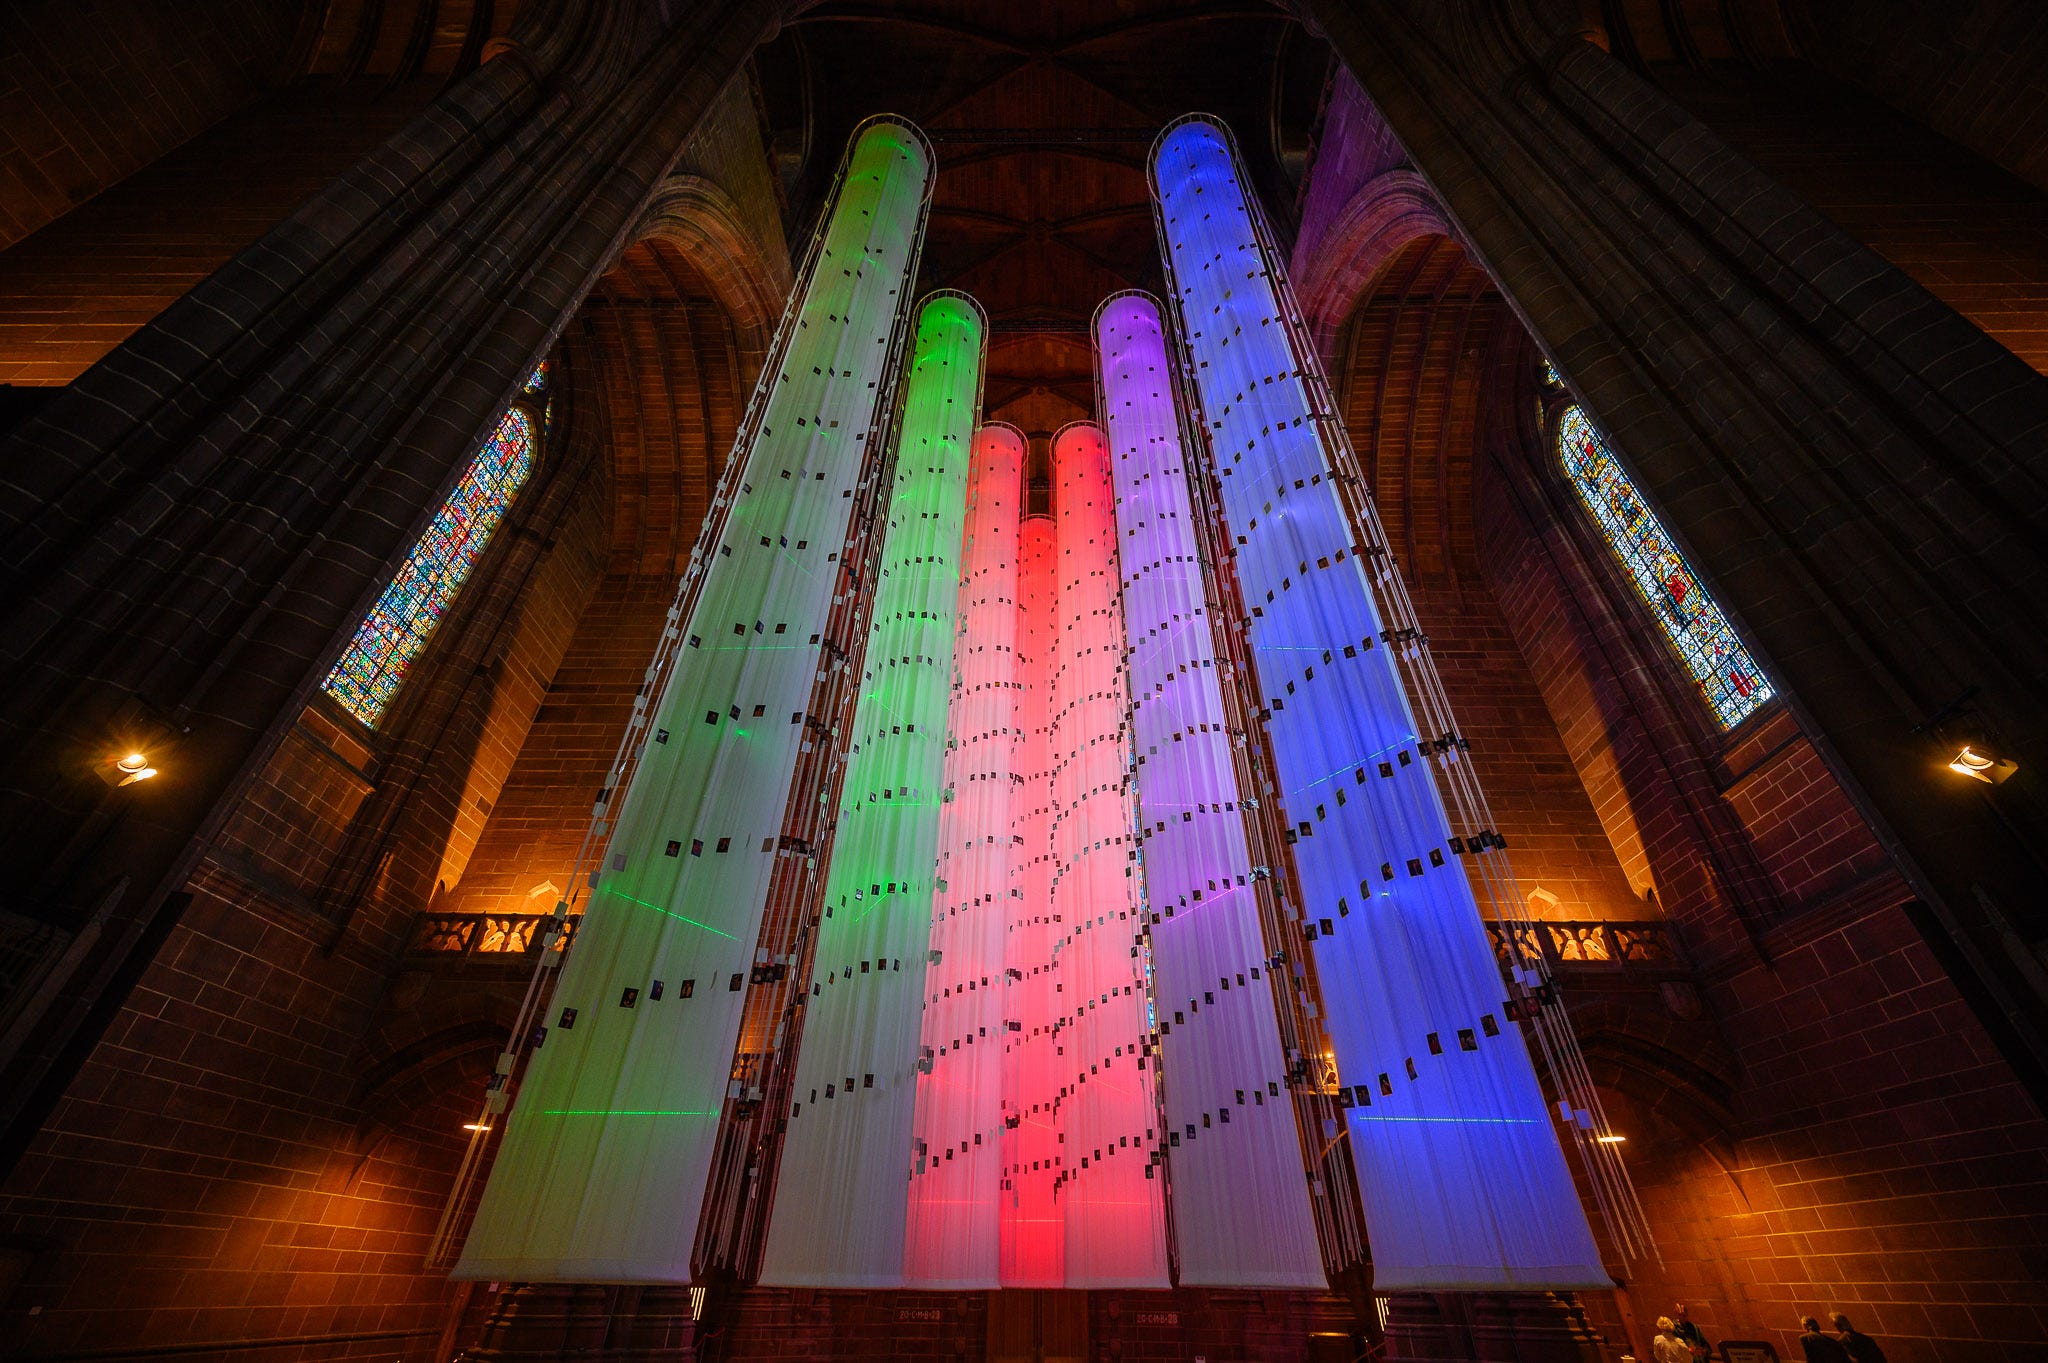 Standing beneath the rainbow columns as the fill the cathedral floor to ceiling. 